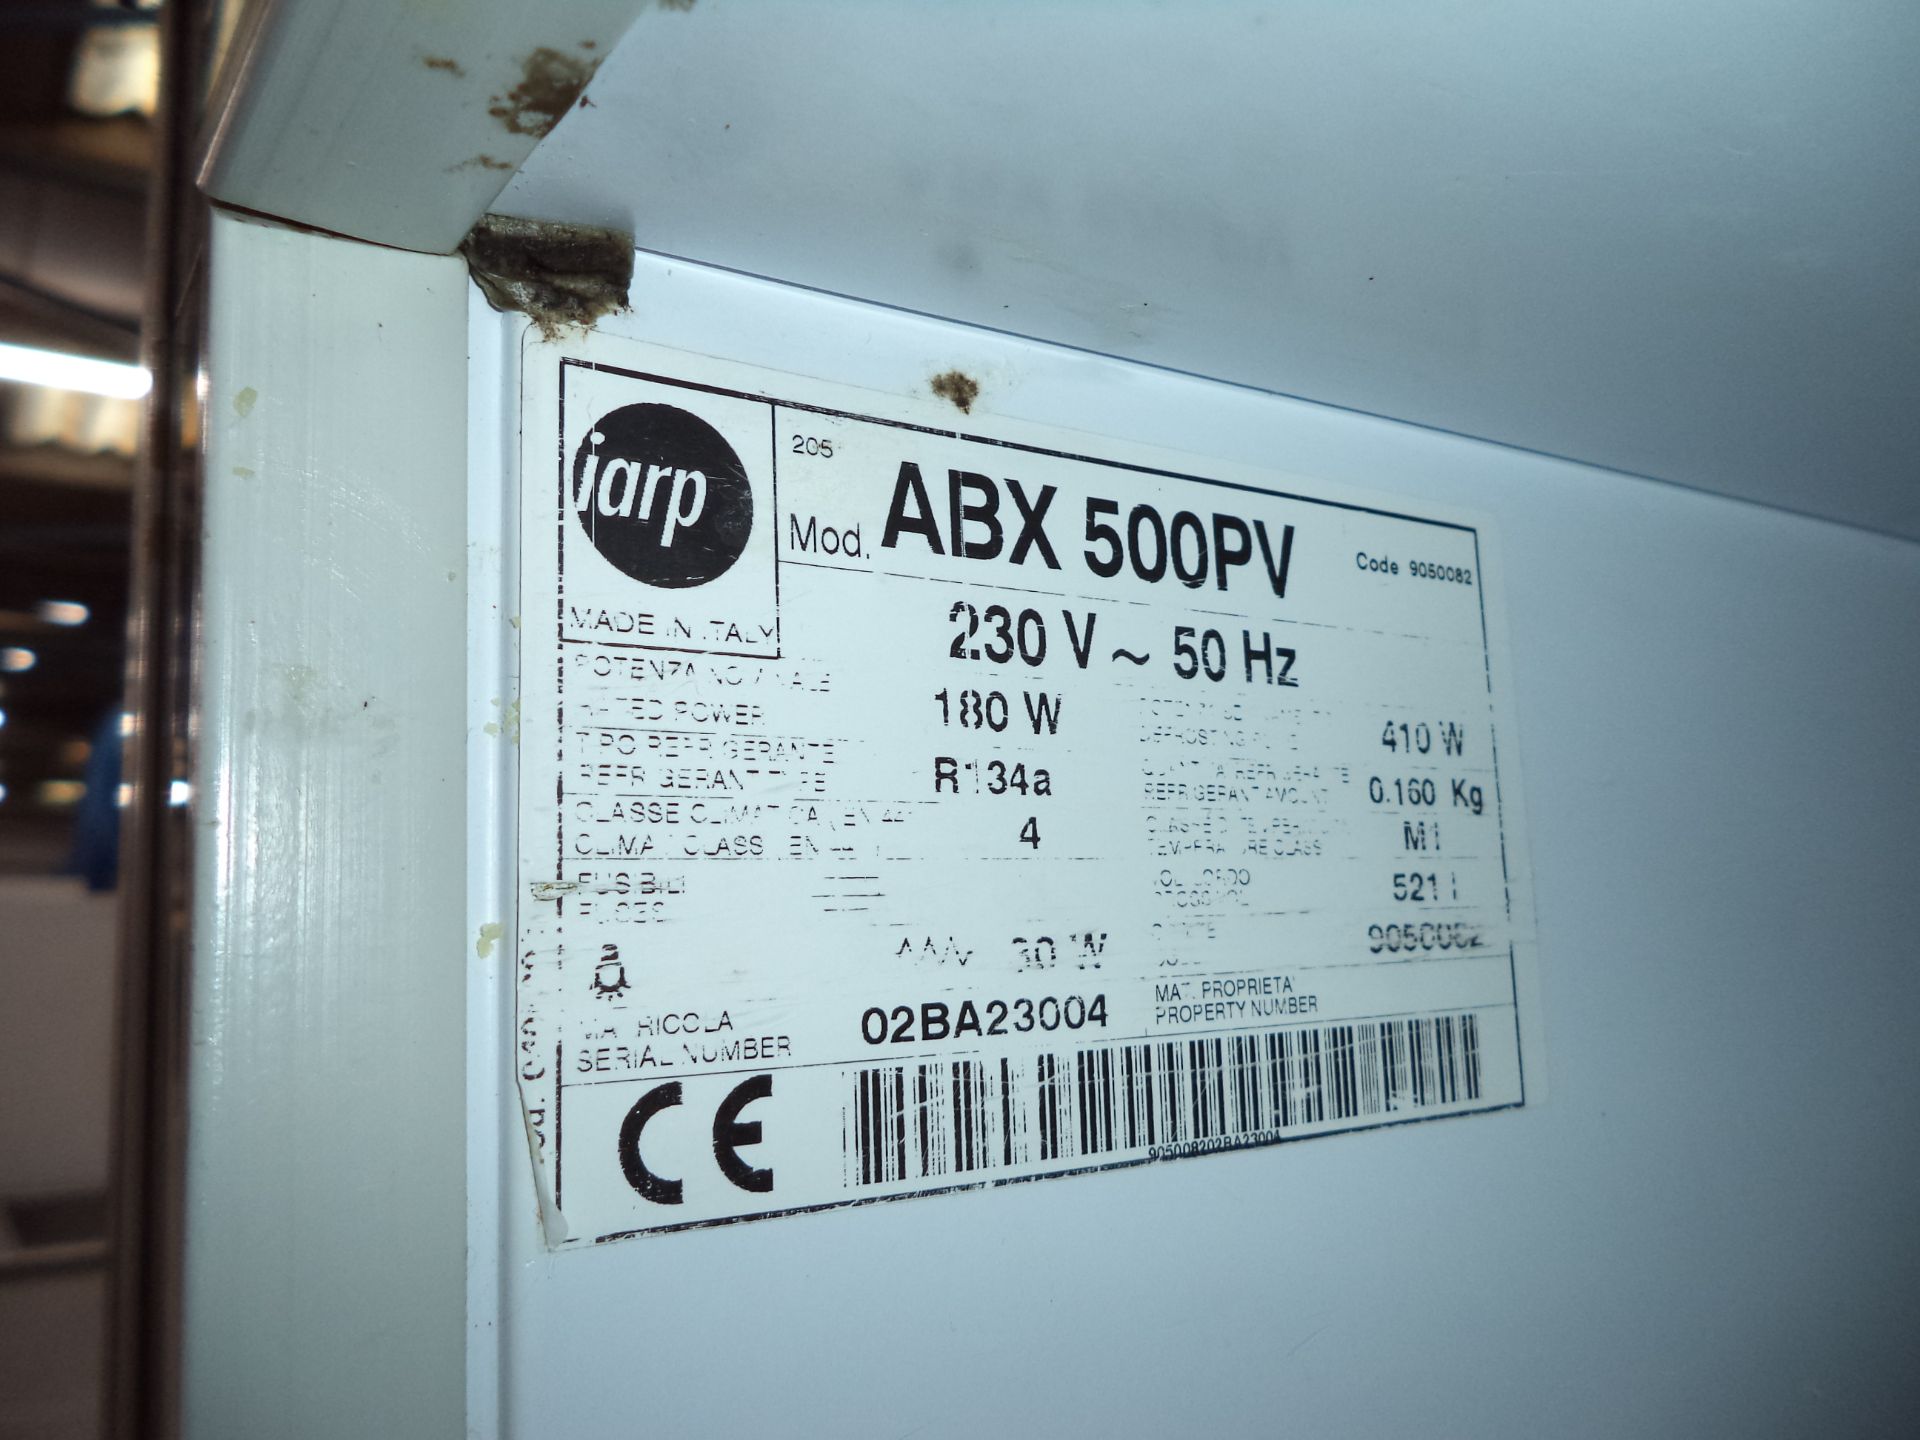 Iarp wide tall silver fridge, model ABX500PV IMPORTANT: Please remember goods successfully bid - Image 4 of 4